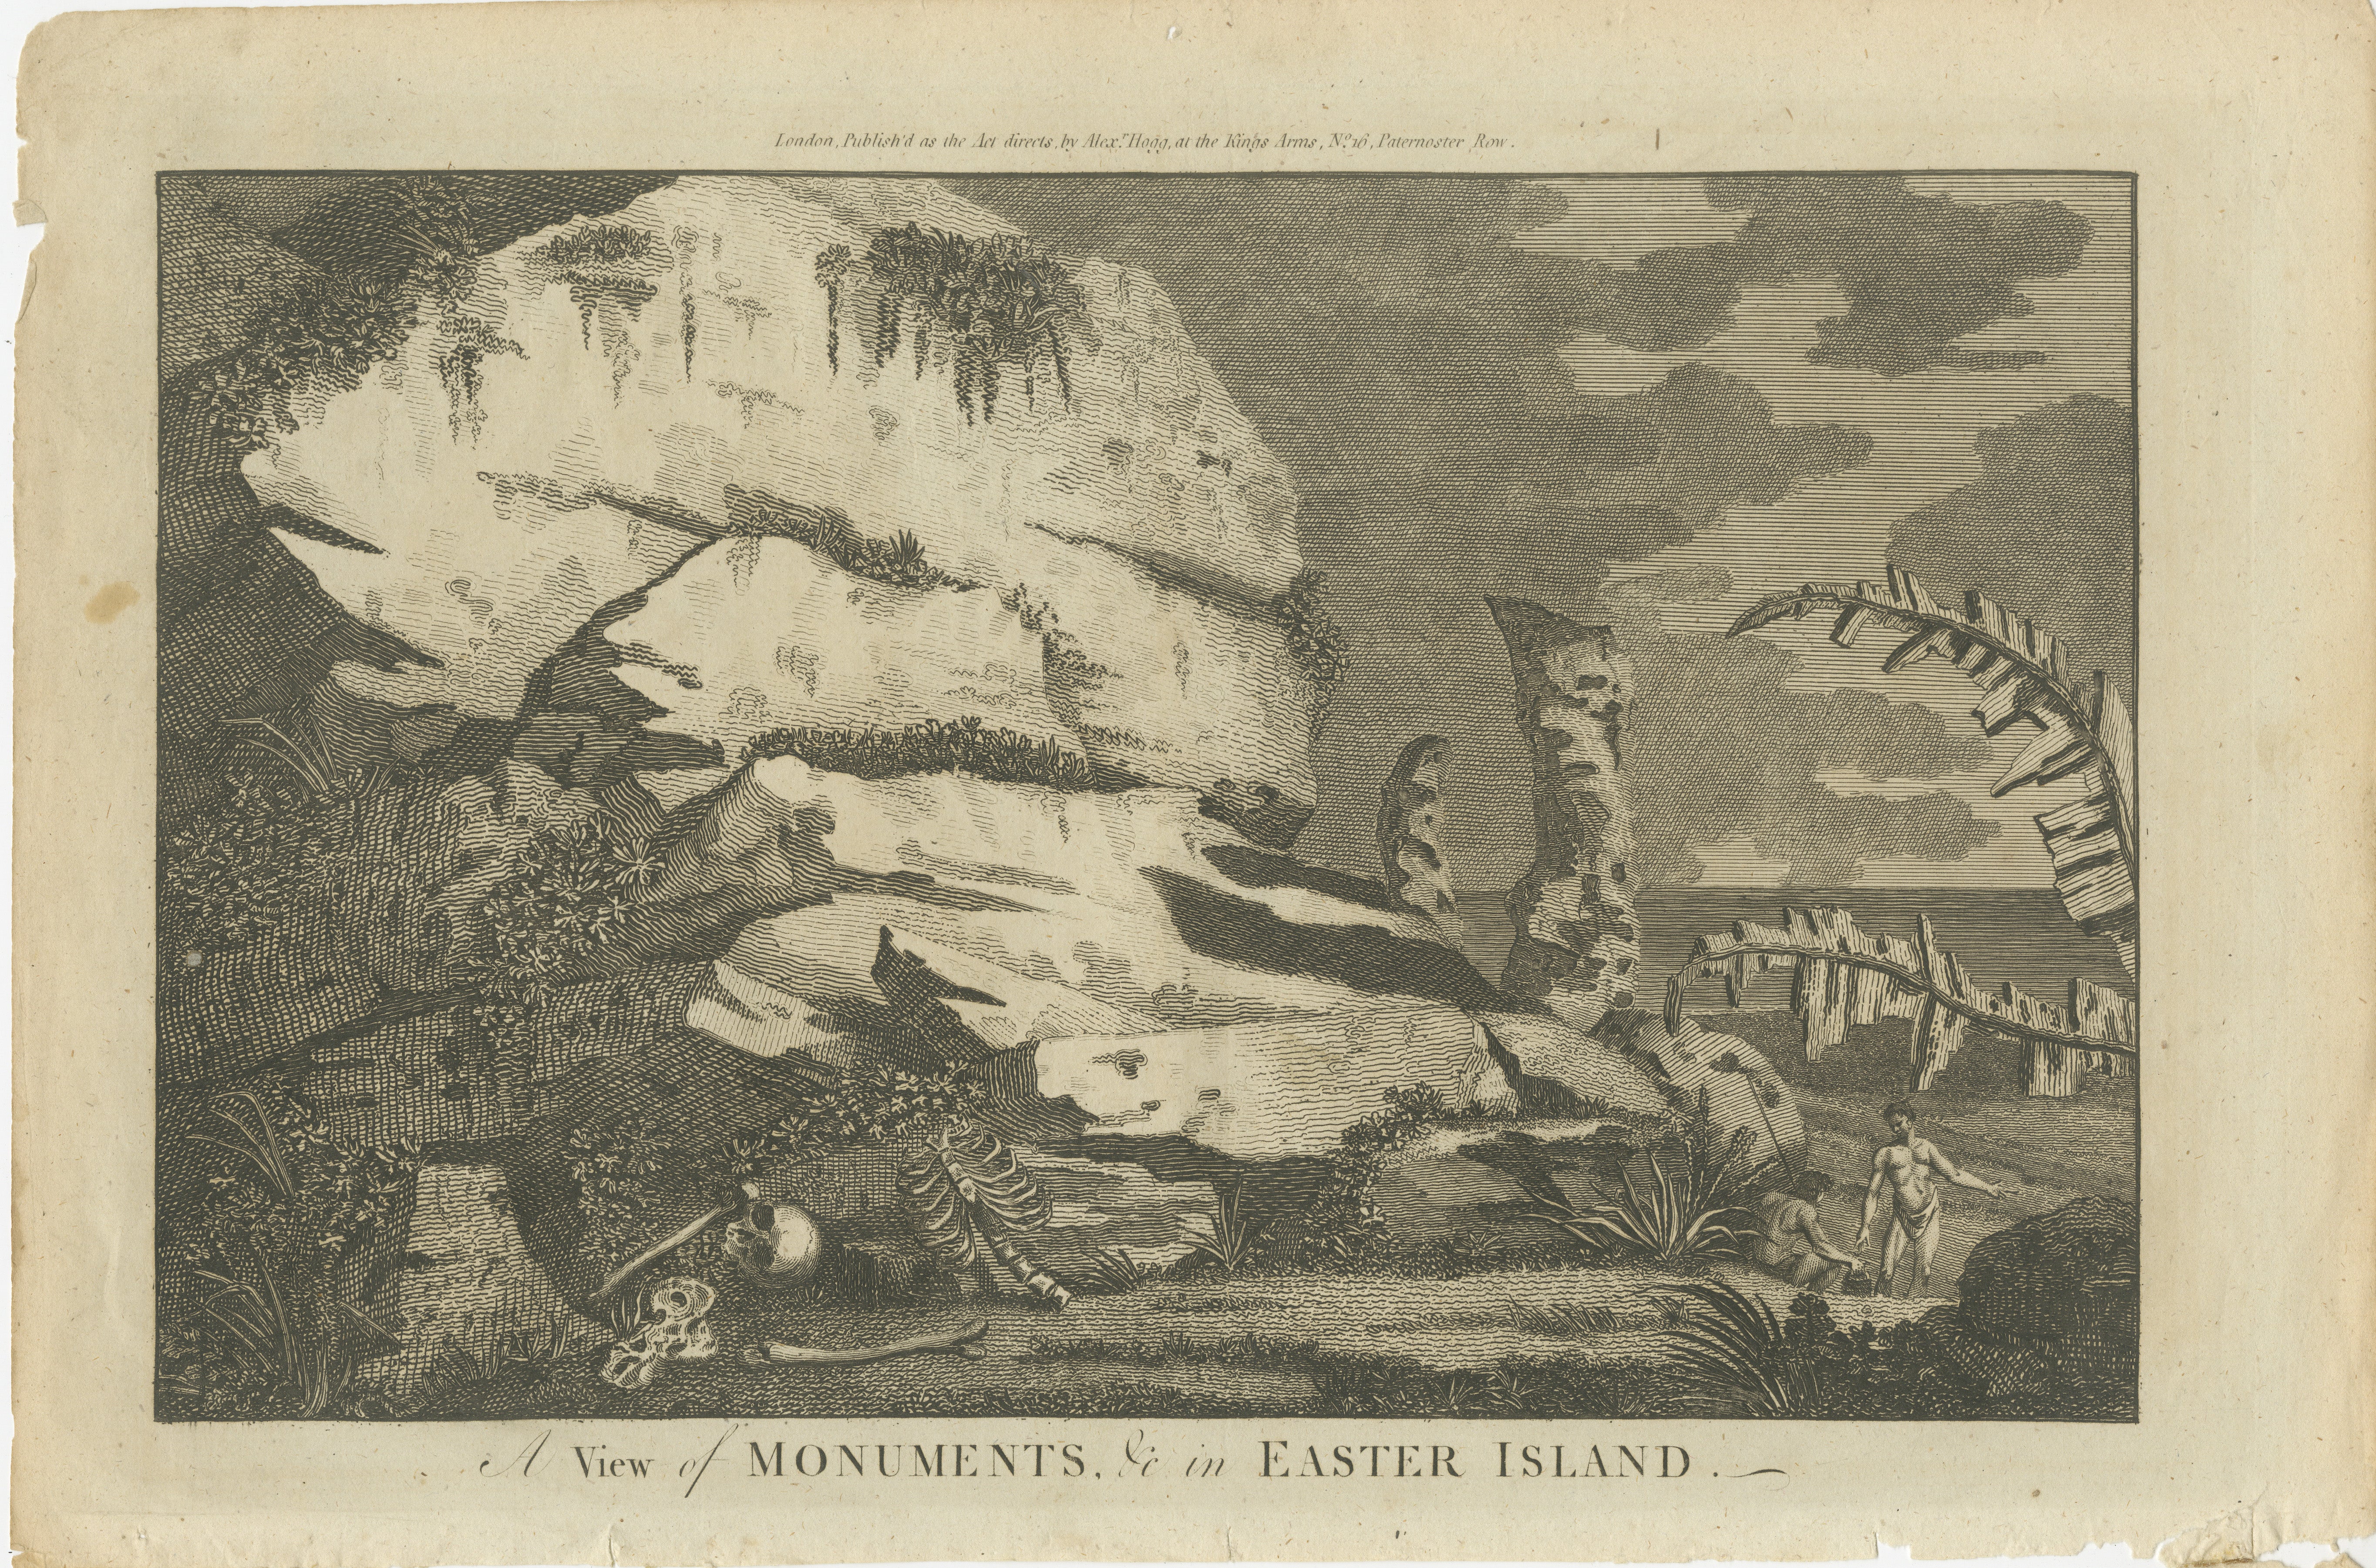 This original antique engraving is a historical depiction of Easter Island, known for its monumental statues called Moai. The image is titled 